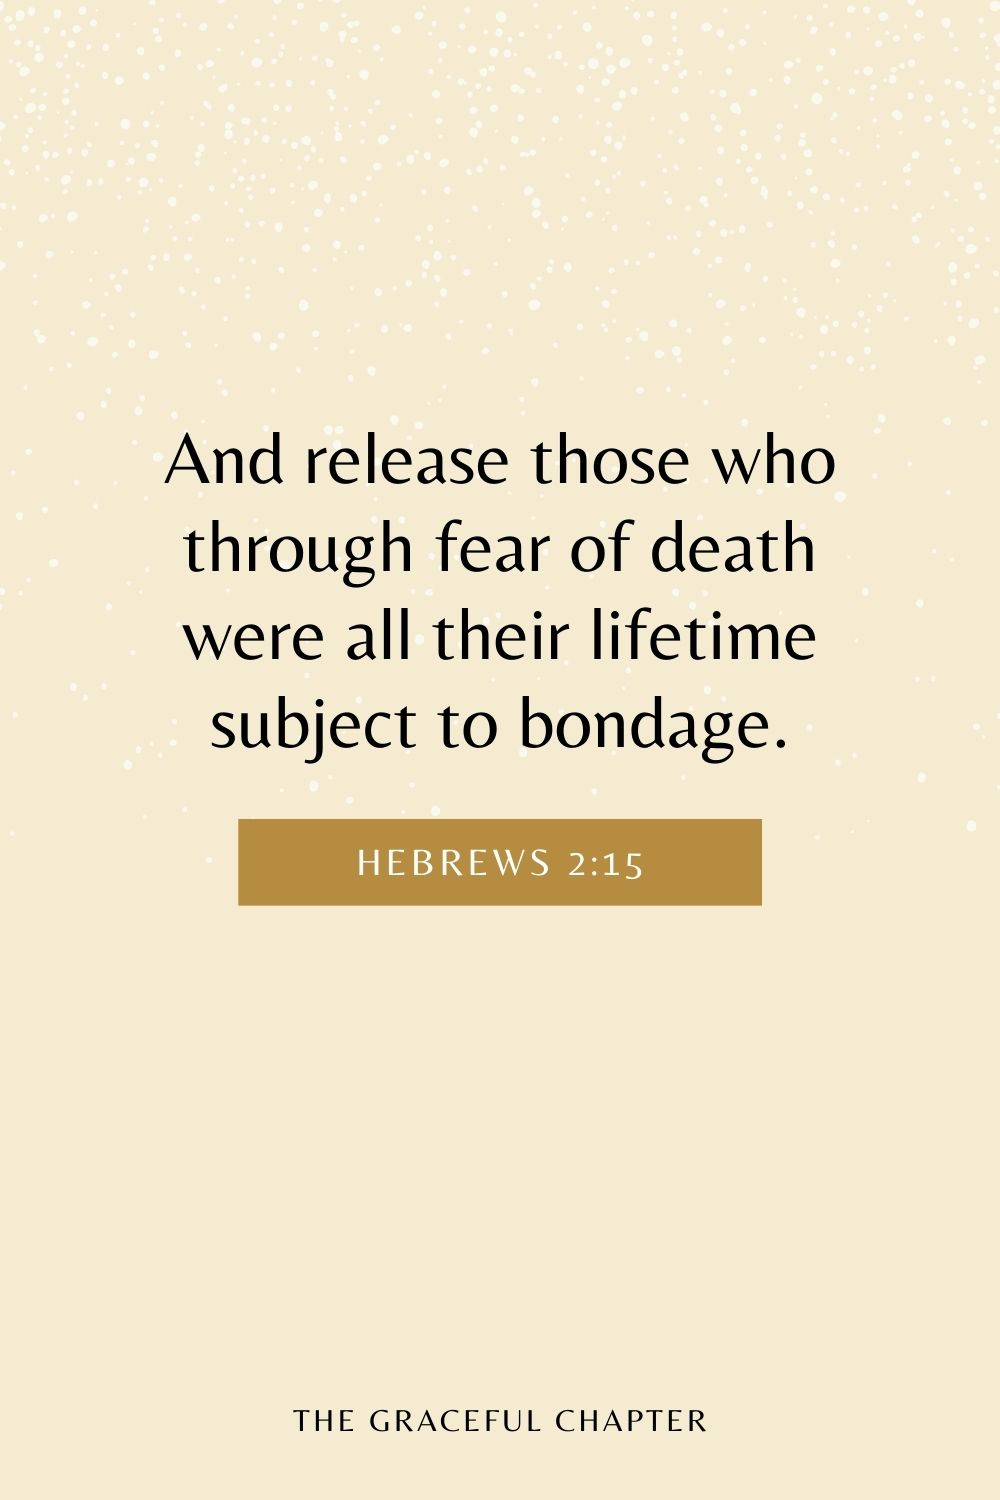 And release those who through fear of death were all their lifetime subject to bondage. Hebrews 2:15